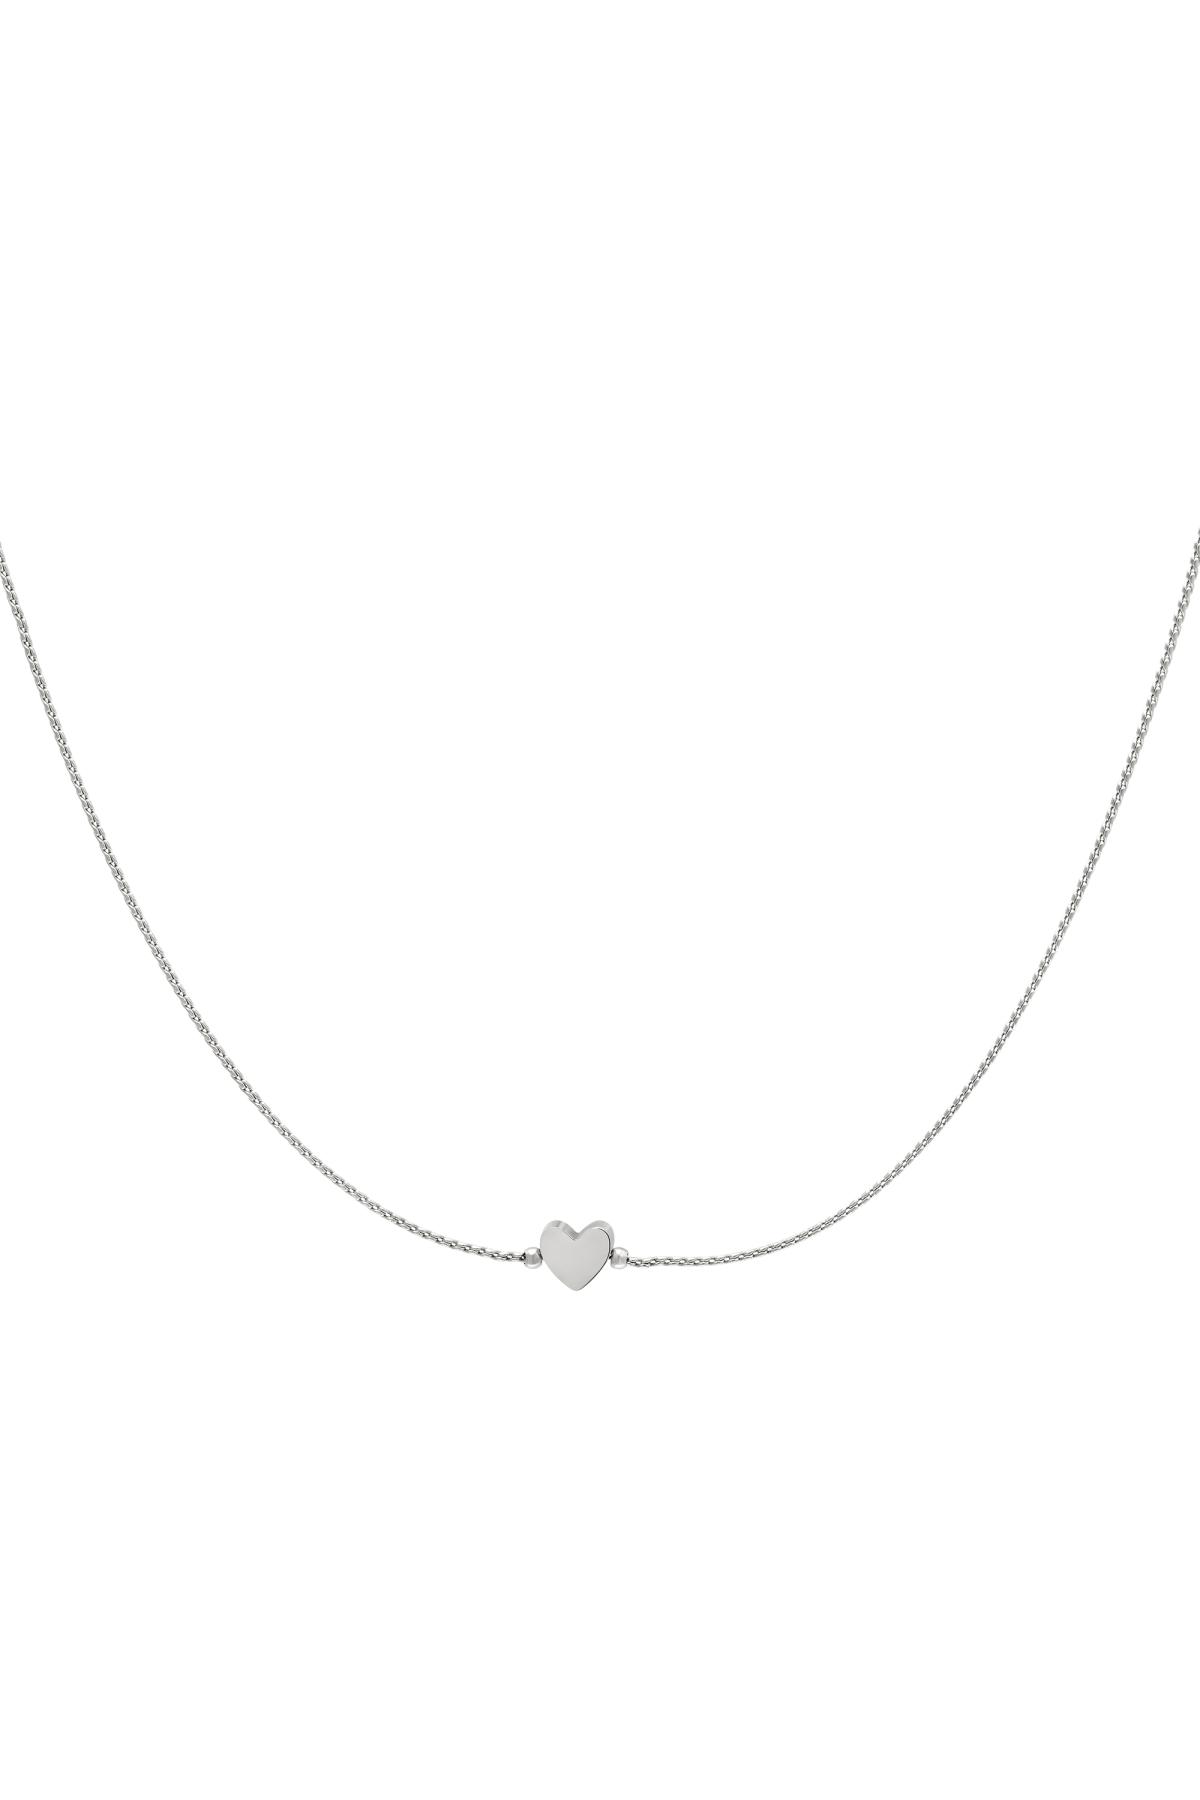 Necklace heart Silver Stainless Steel